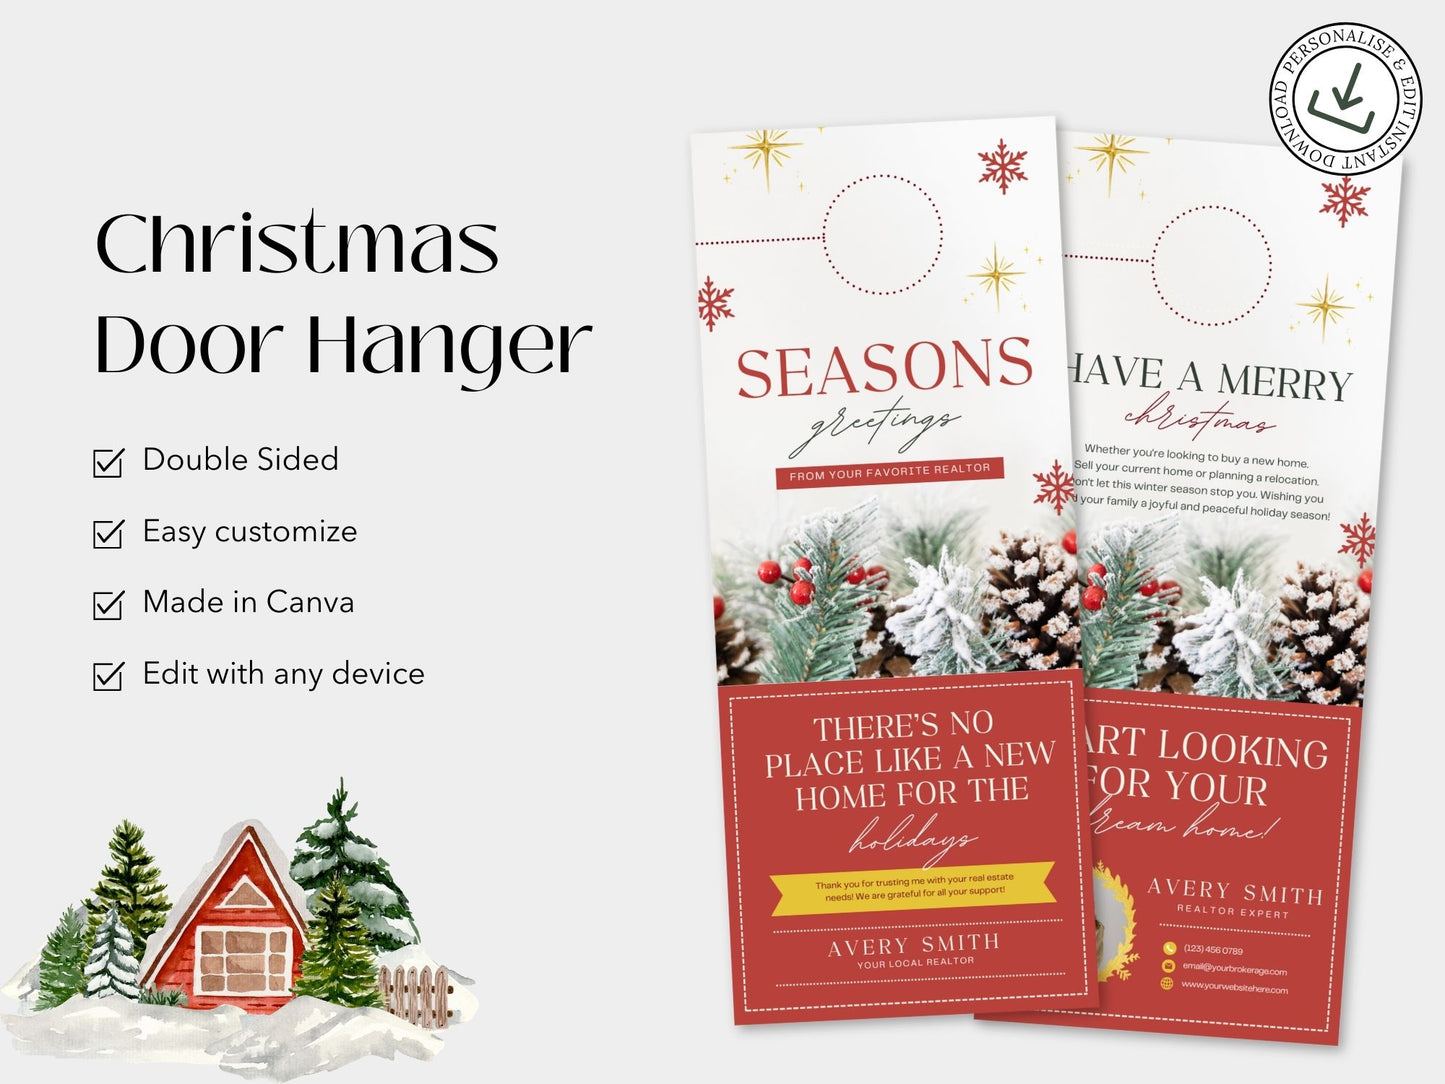 Real Estate Seasons Greeting Christmas Door Hanger - Red: Spreading Festive Holiday Cheer to Clients and the Community